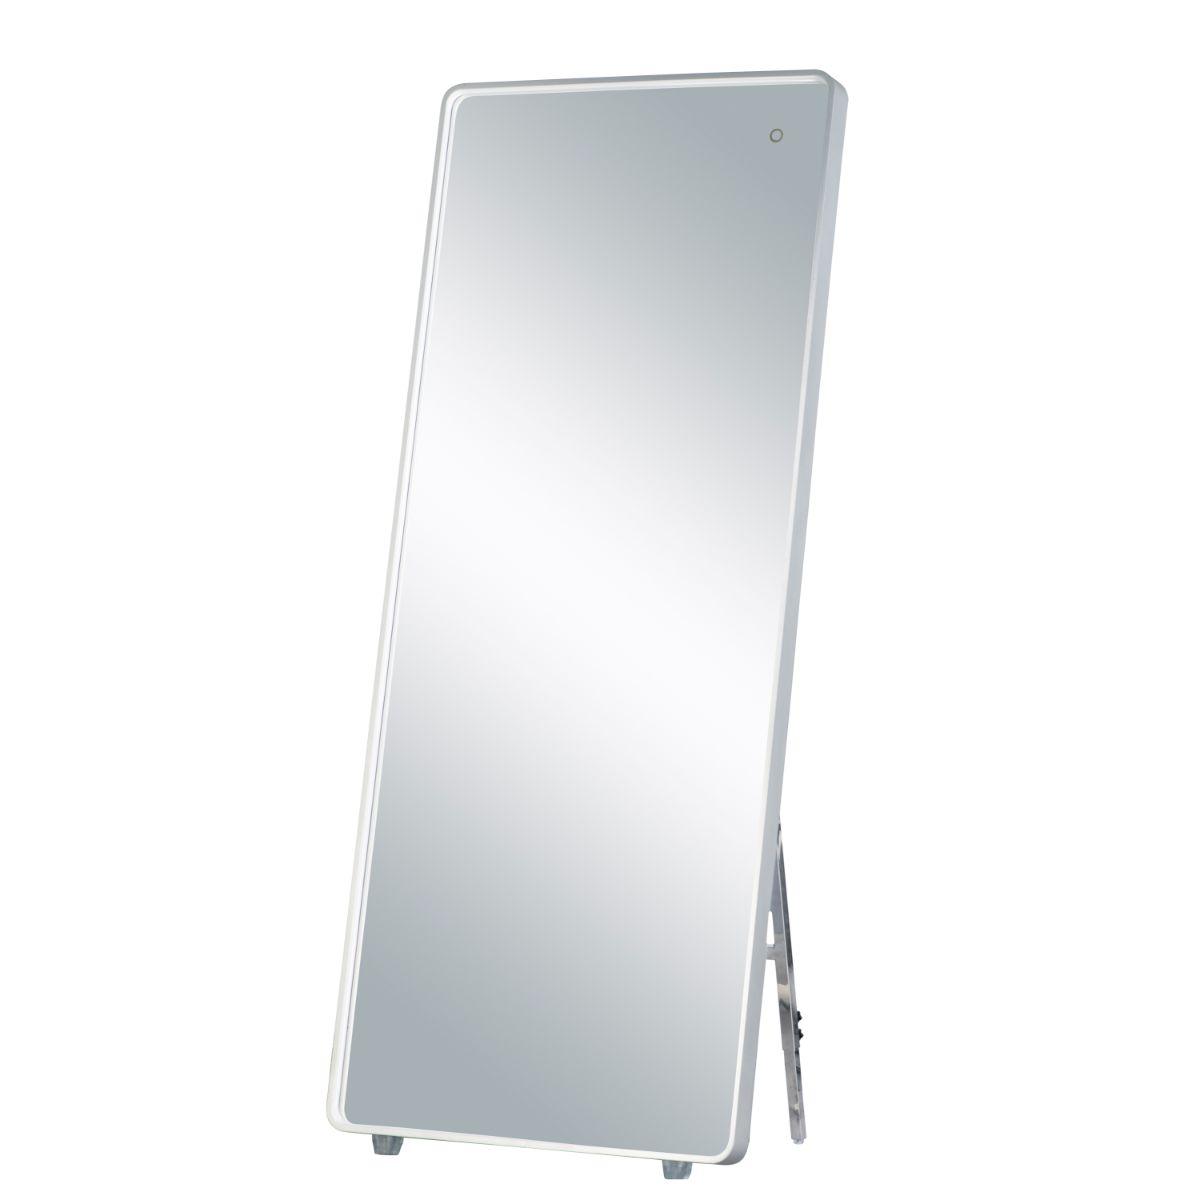 Mirror 67 in. x 28 in. Framed LED Mirror Brushed Aluminum Finish